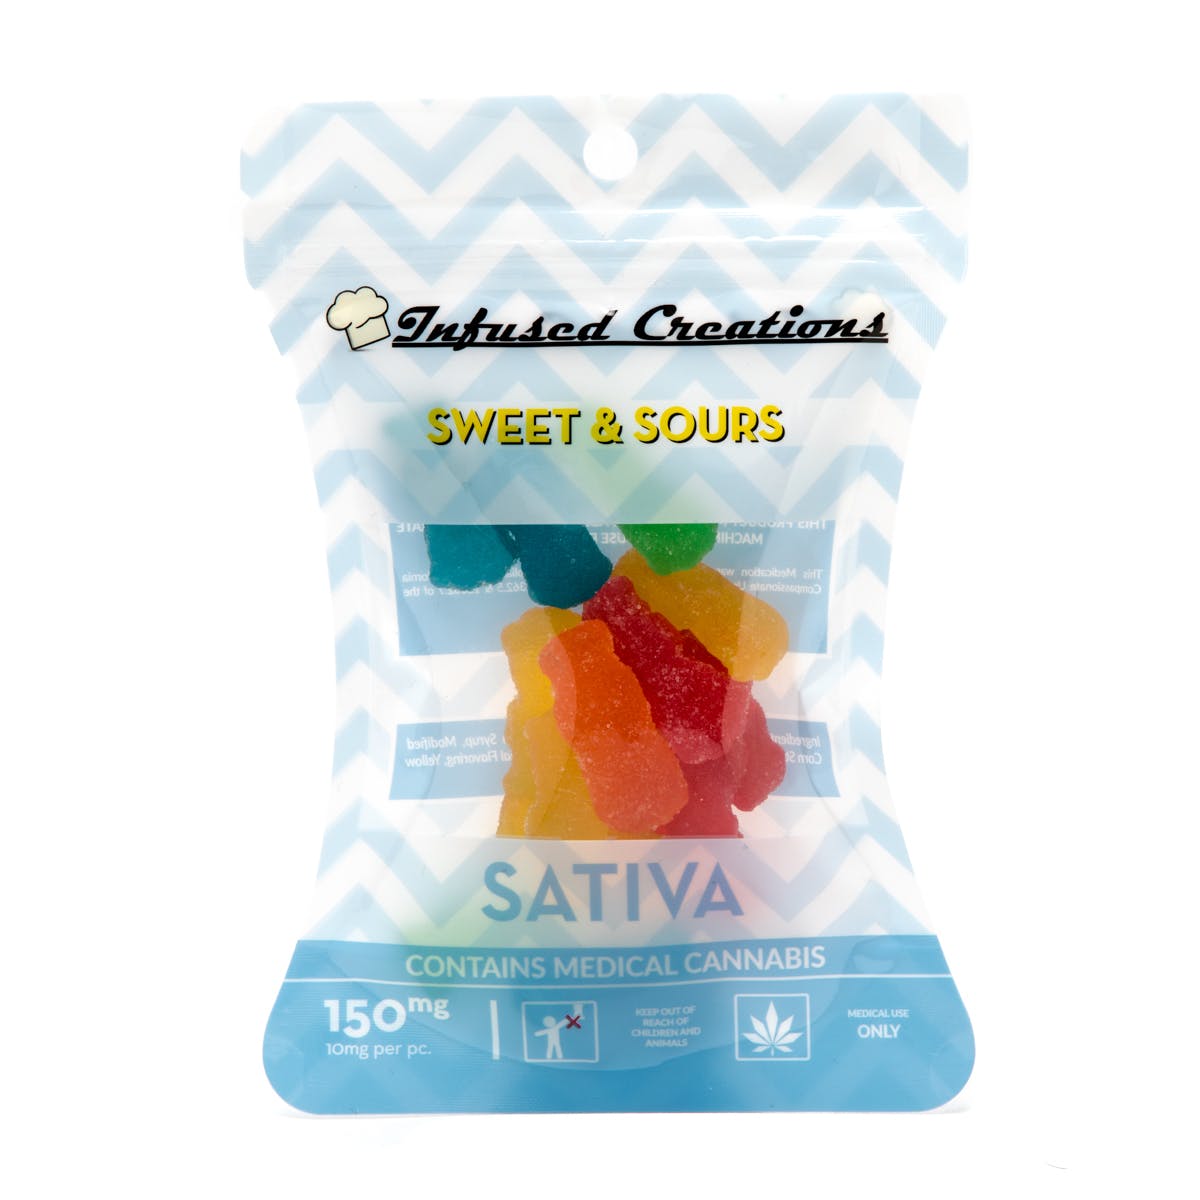 Sweet & Sours Sativa, 150mg